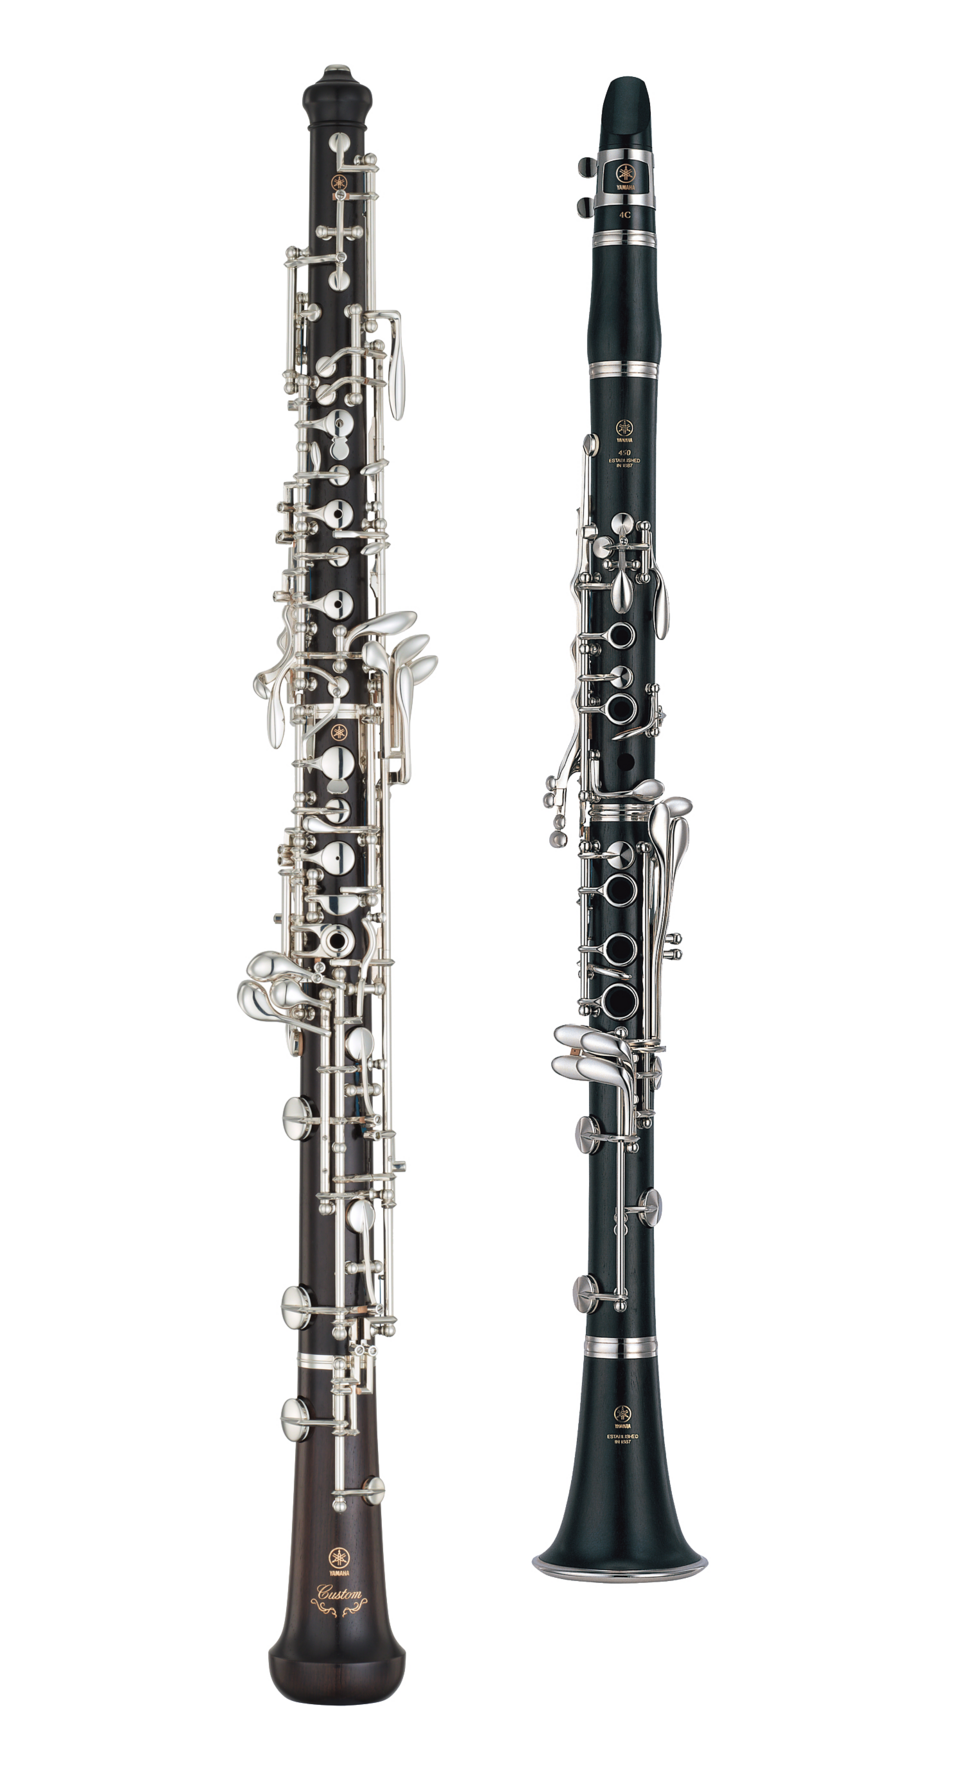 The clarinet (right) and the oboe (left) are typical instruments made from African blackwood. As one would expect from the wood’s name, the instruments’ pipe-shaped bodies have a black hue.